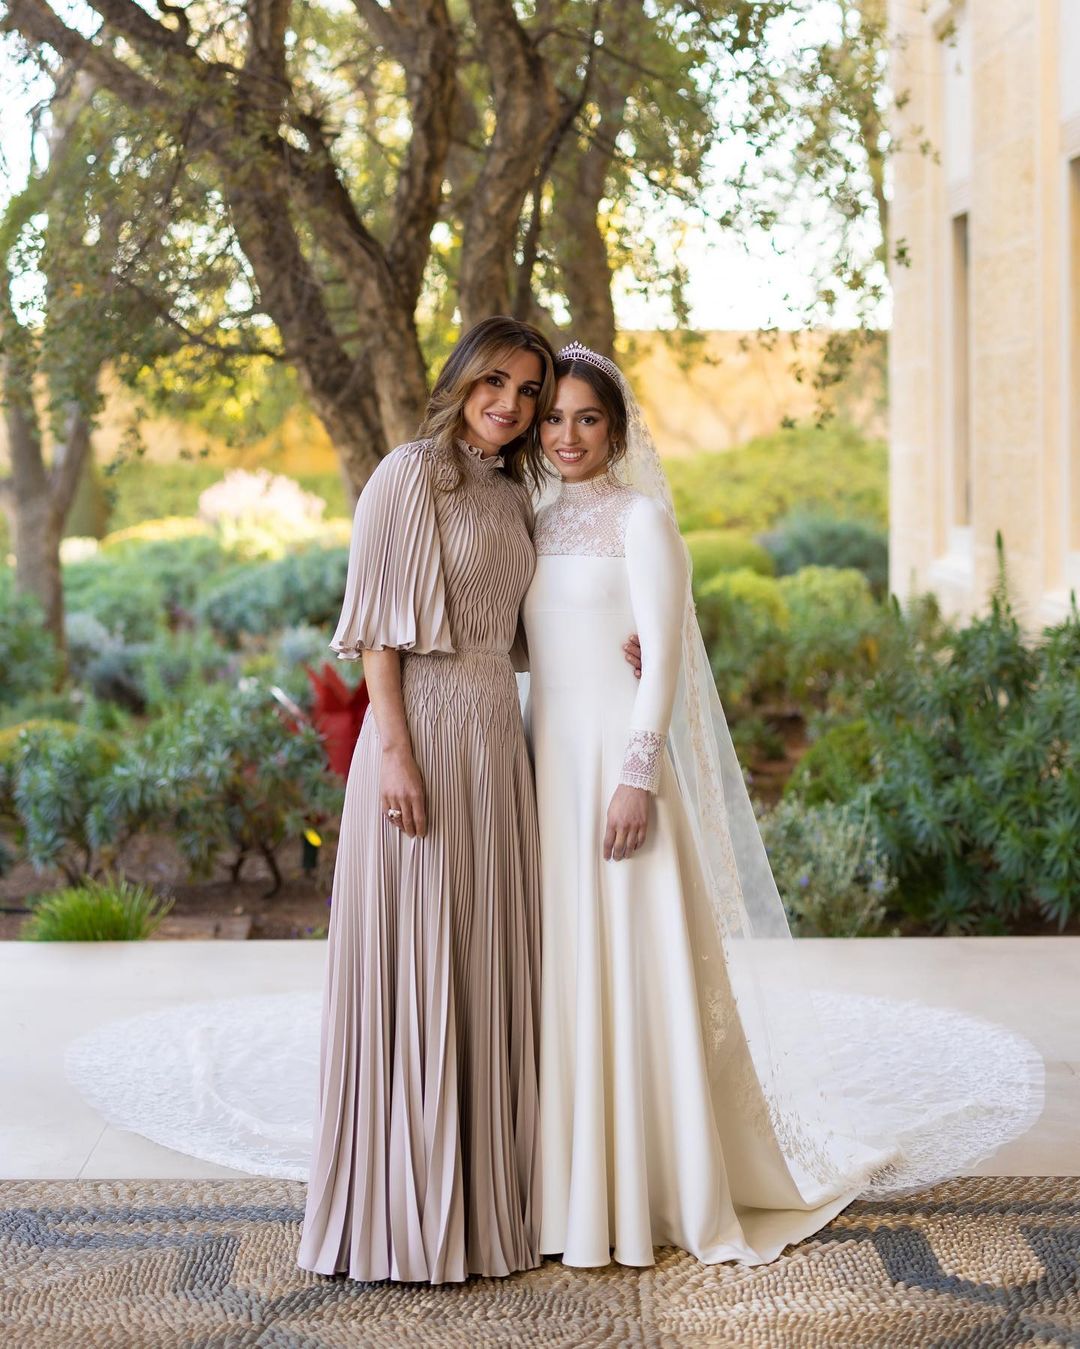 Queen Rania's Most Iconic Looks In Honour Of Her 53rd Birthday